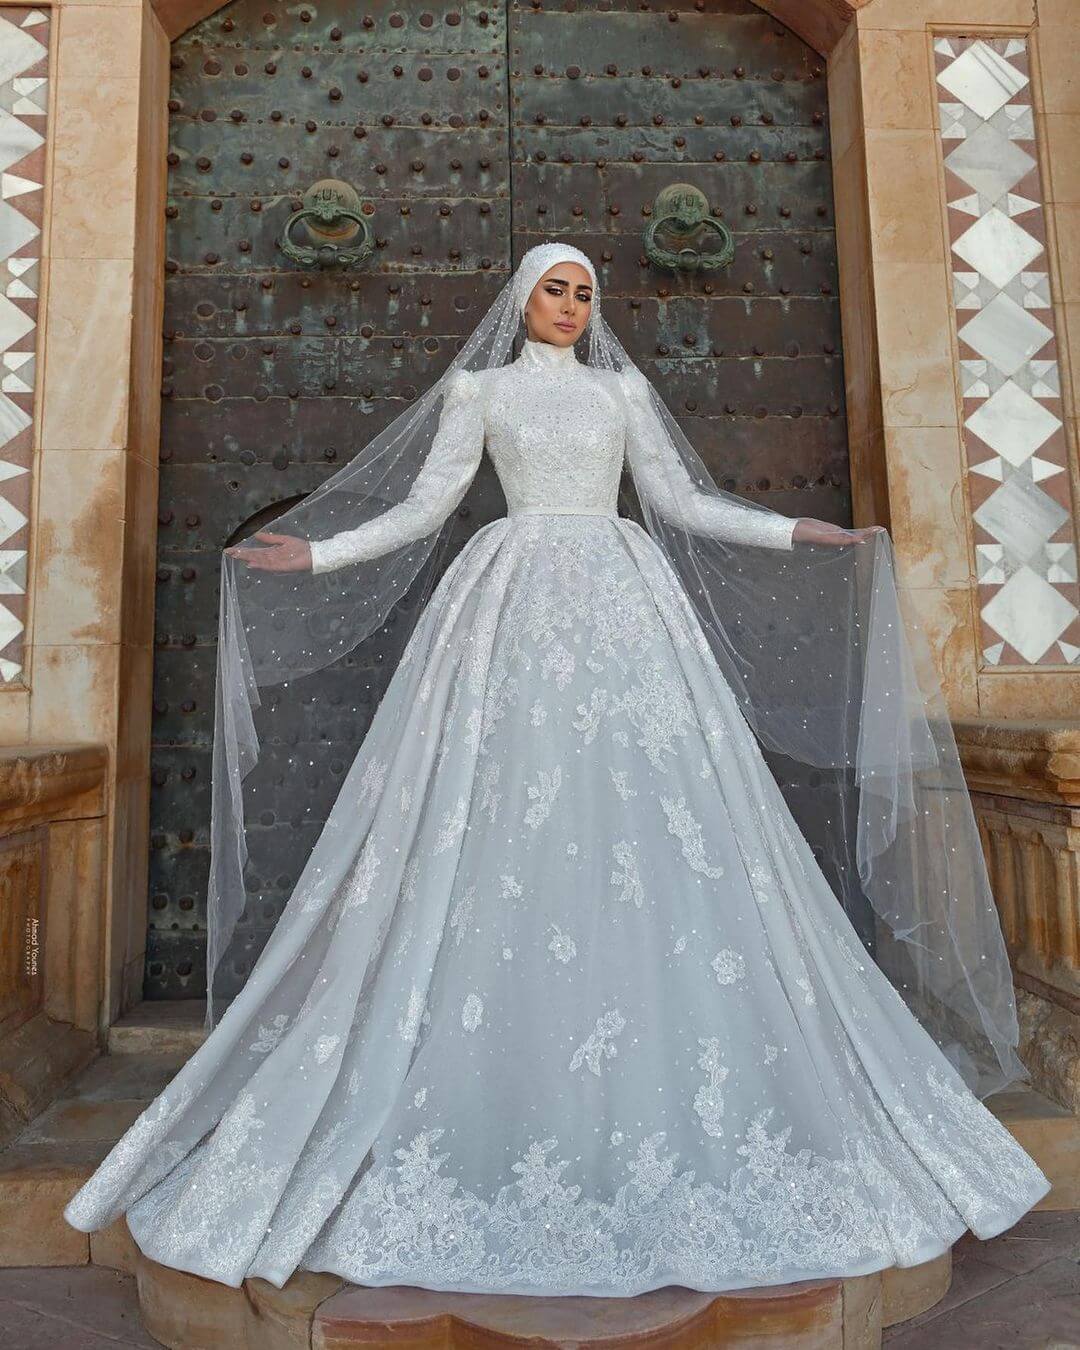 Some Modern and Fashionable Hijab Wedding Dress Ideas 2021 White Full Neck Gown - Big Veil